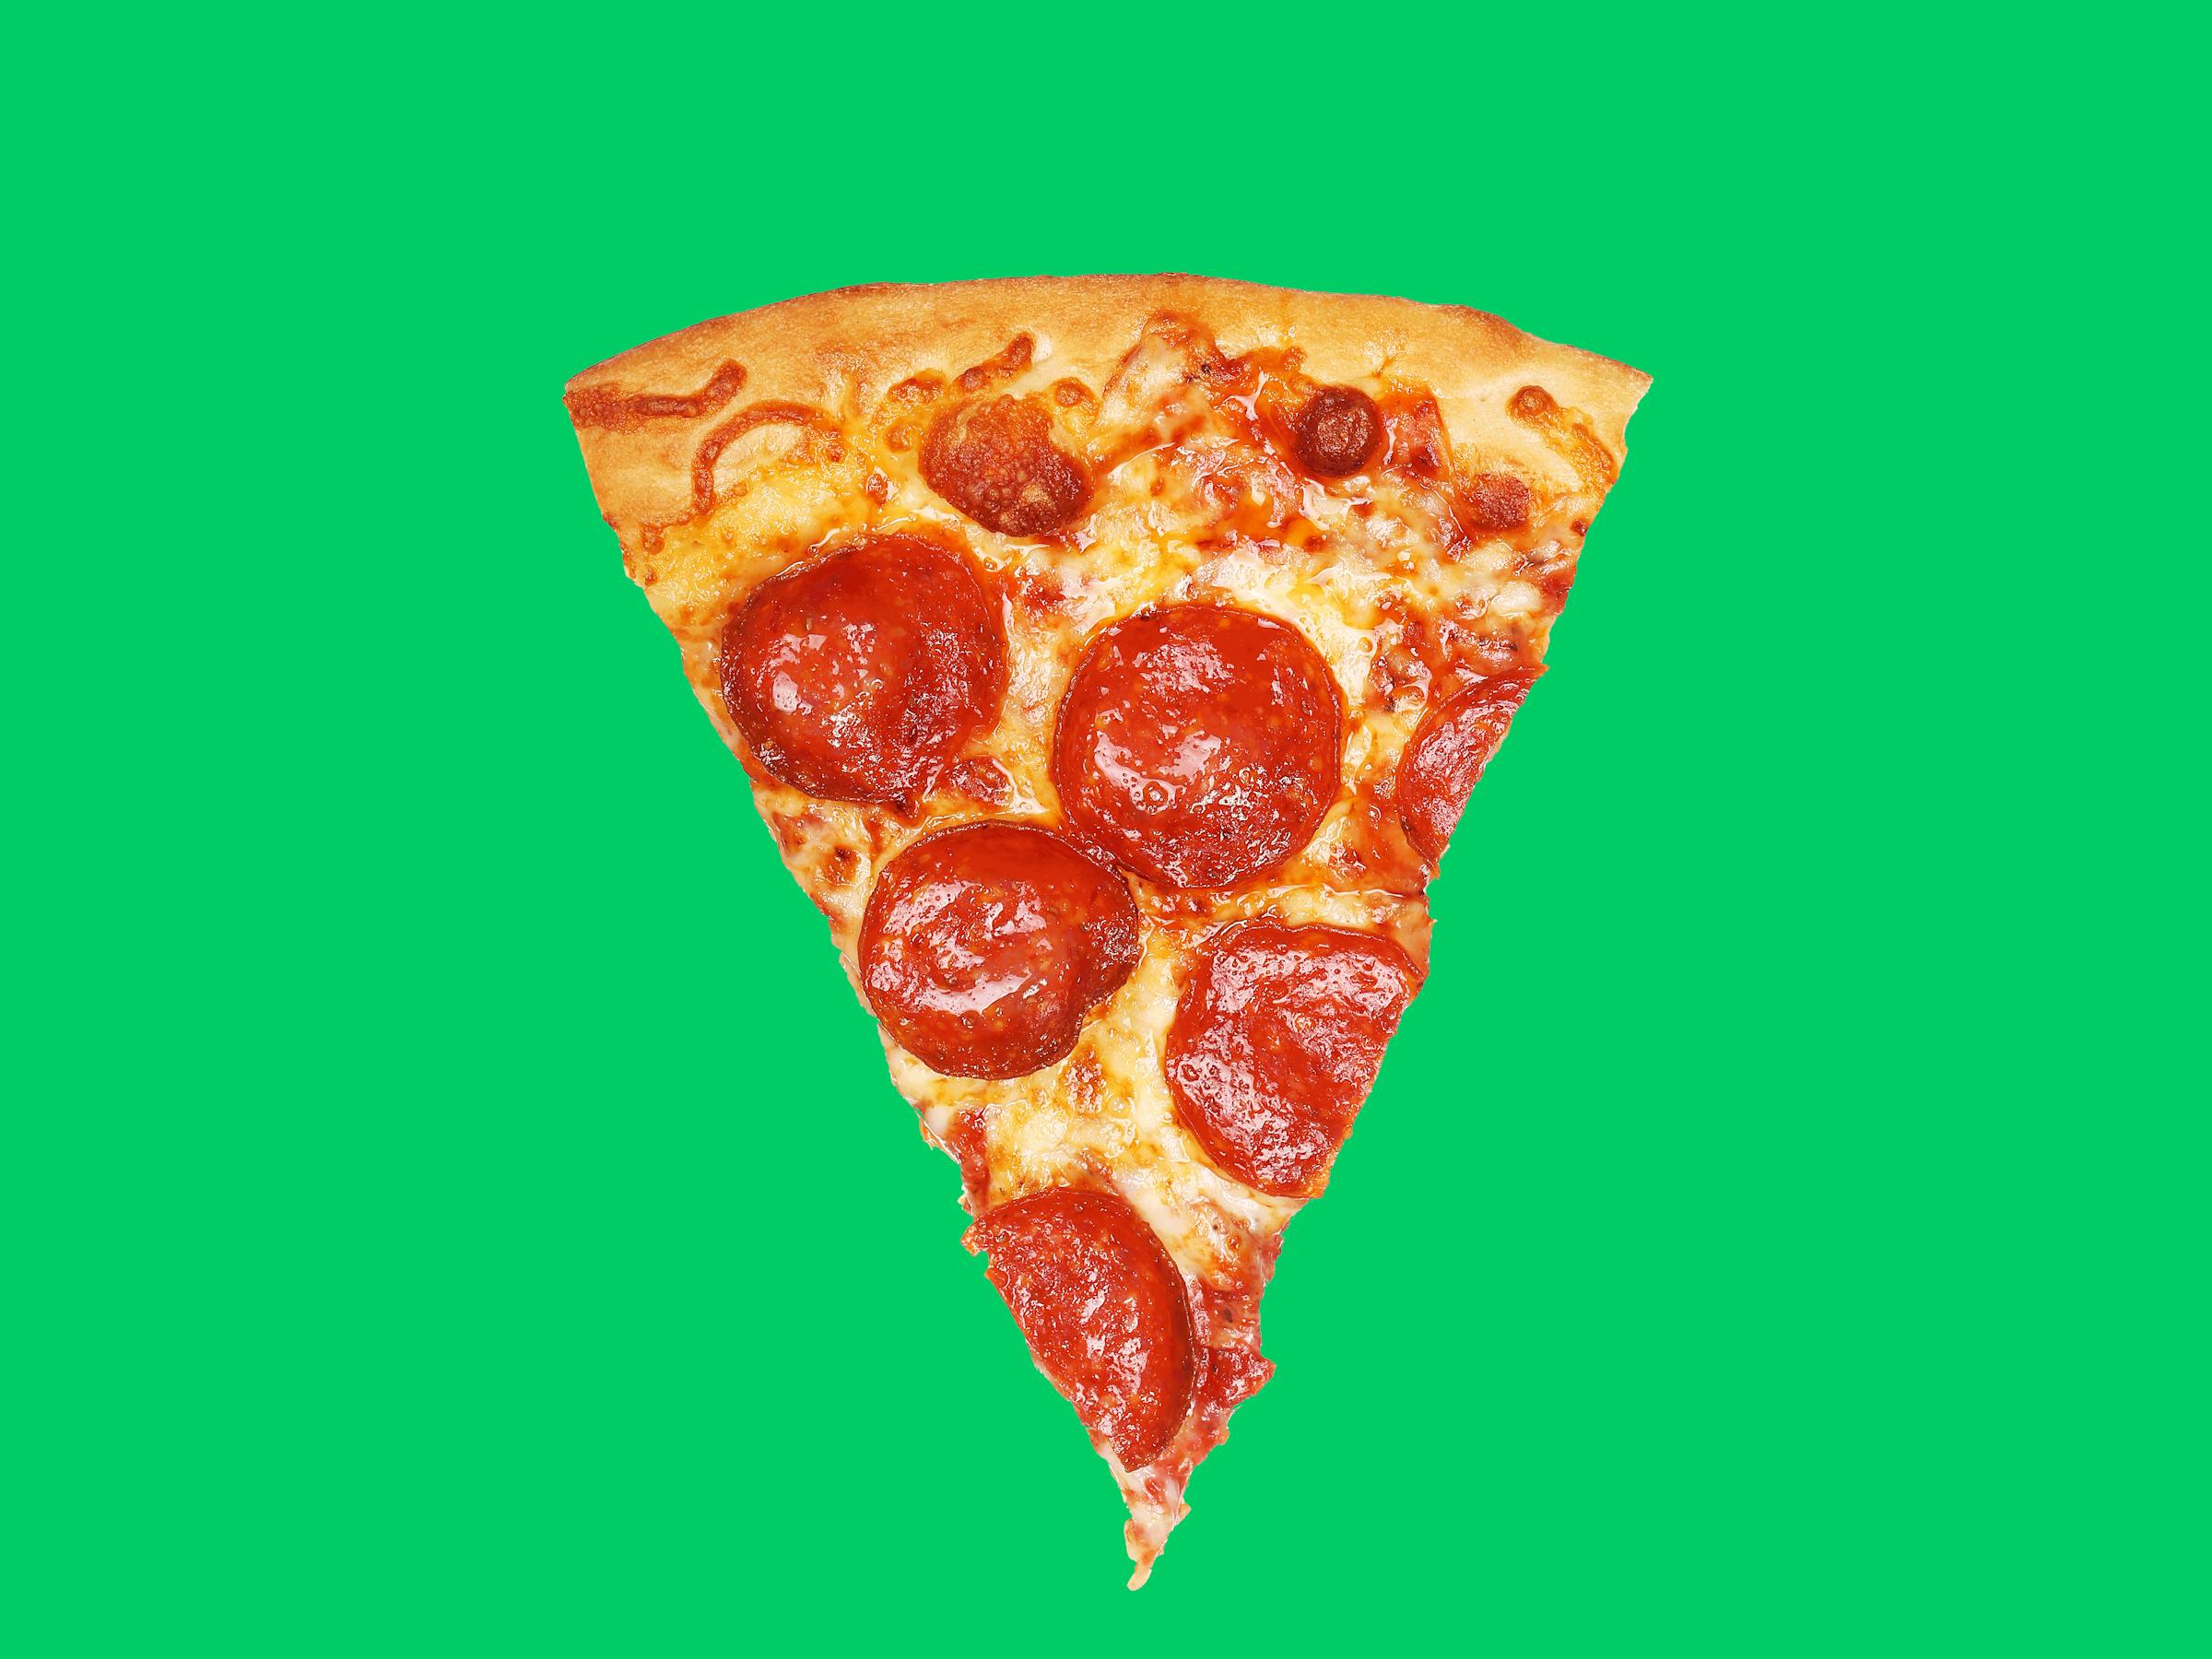 Pepperoni pizza slice on a green background